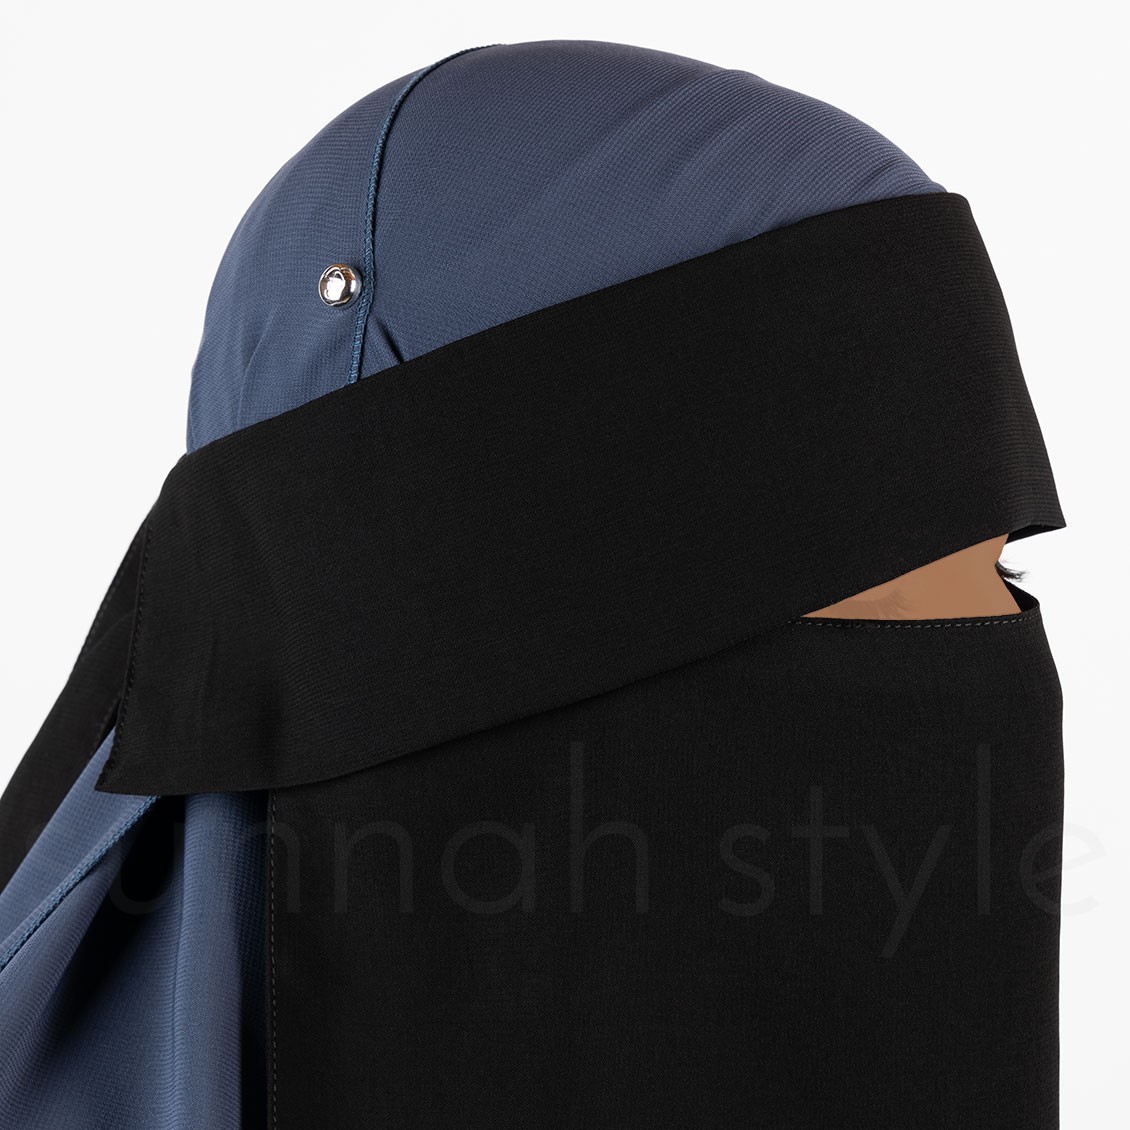 Sunnah Style One Layer Flap Makeup Niqab Black